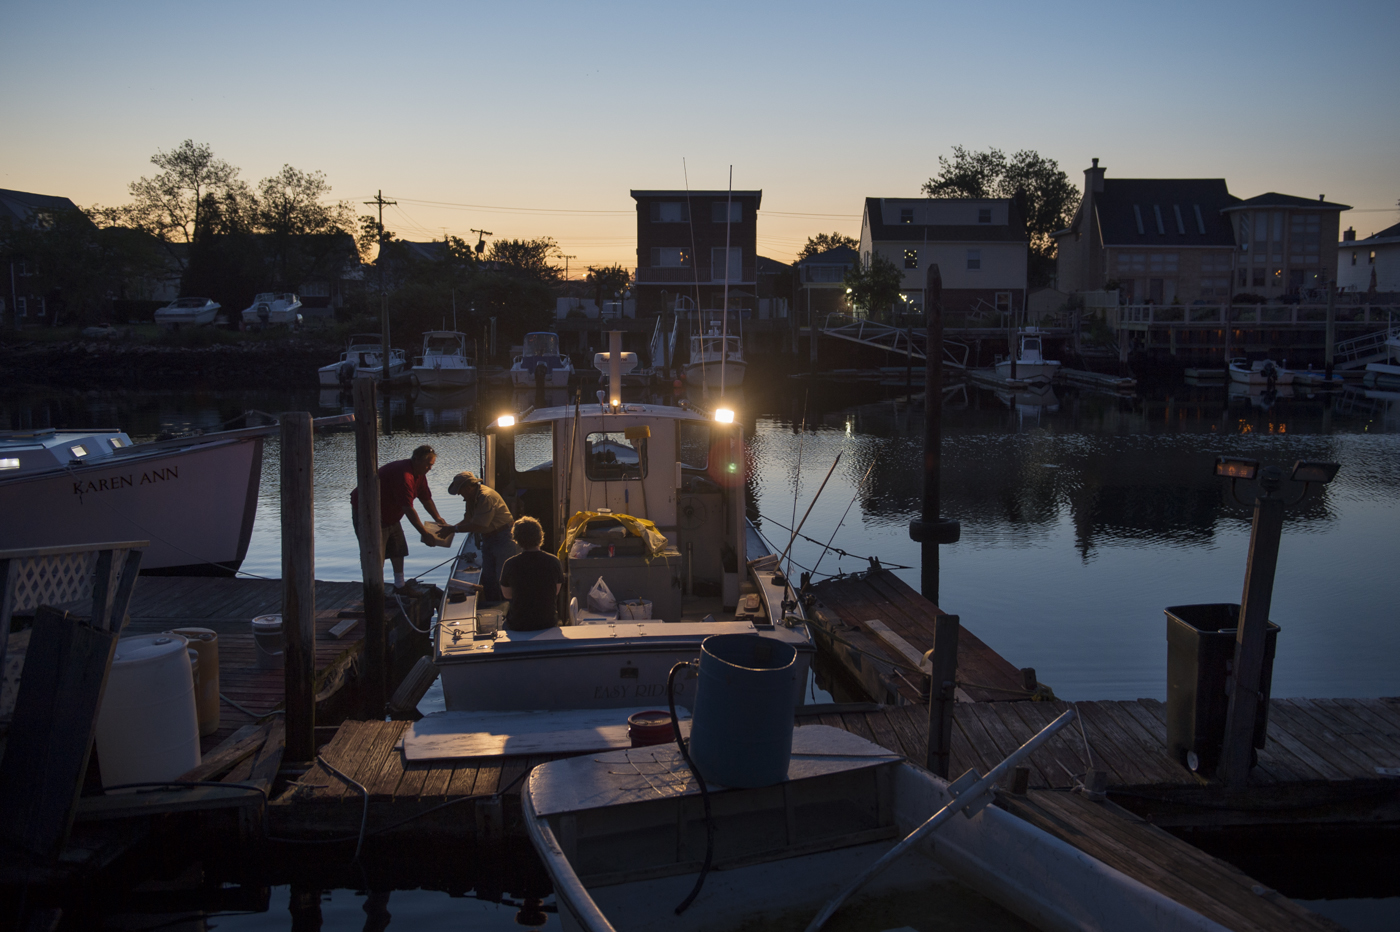  James Culleton prepares for a day of fishing aboard his boat, the Easy Rider, in Howard Beach, Brooklyn in the summer of 2013.&nbsp; After a long and troubled winter, James’s regains some normalcy in his life by returning to the water.  